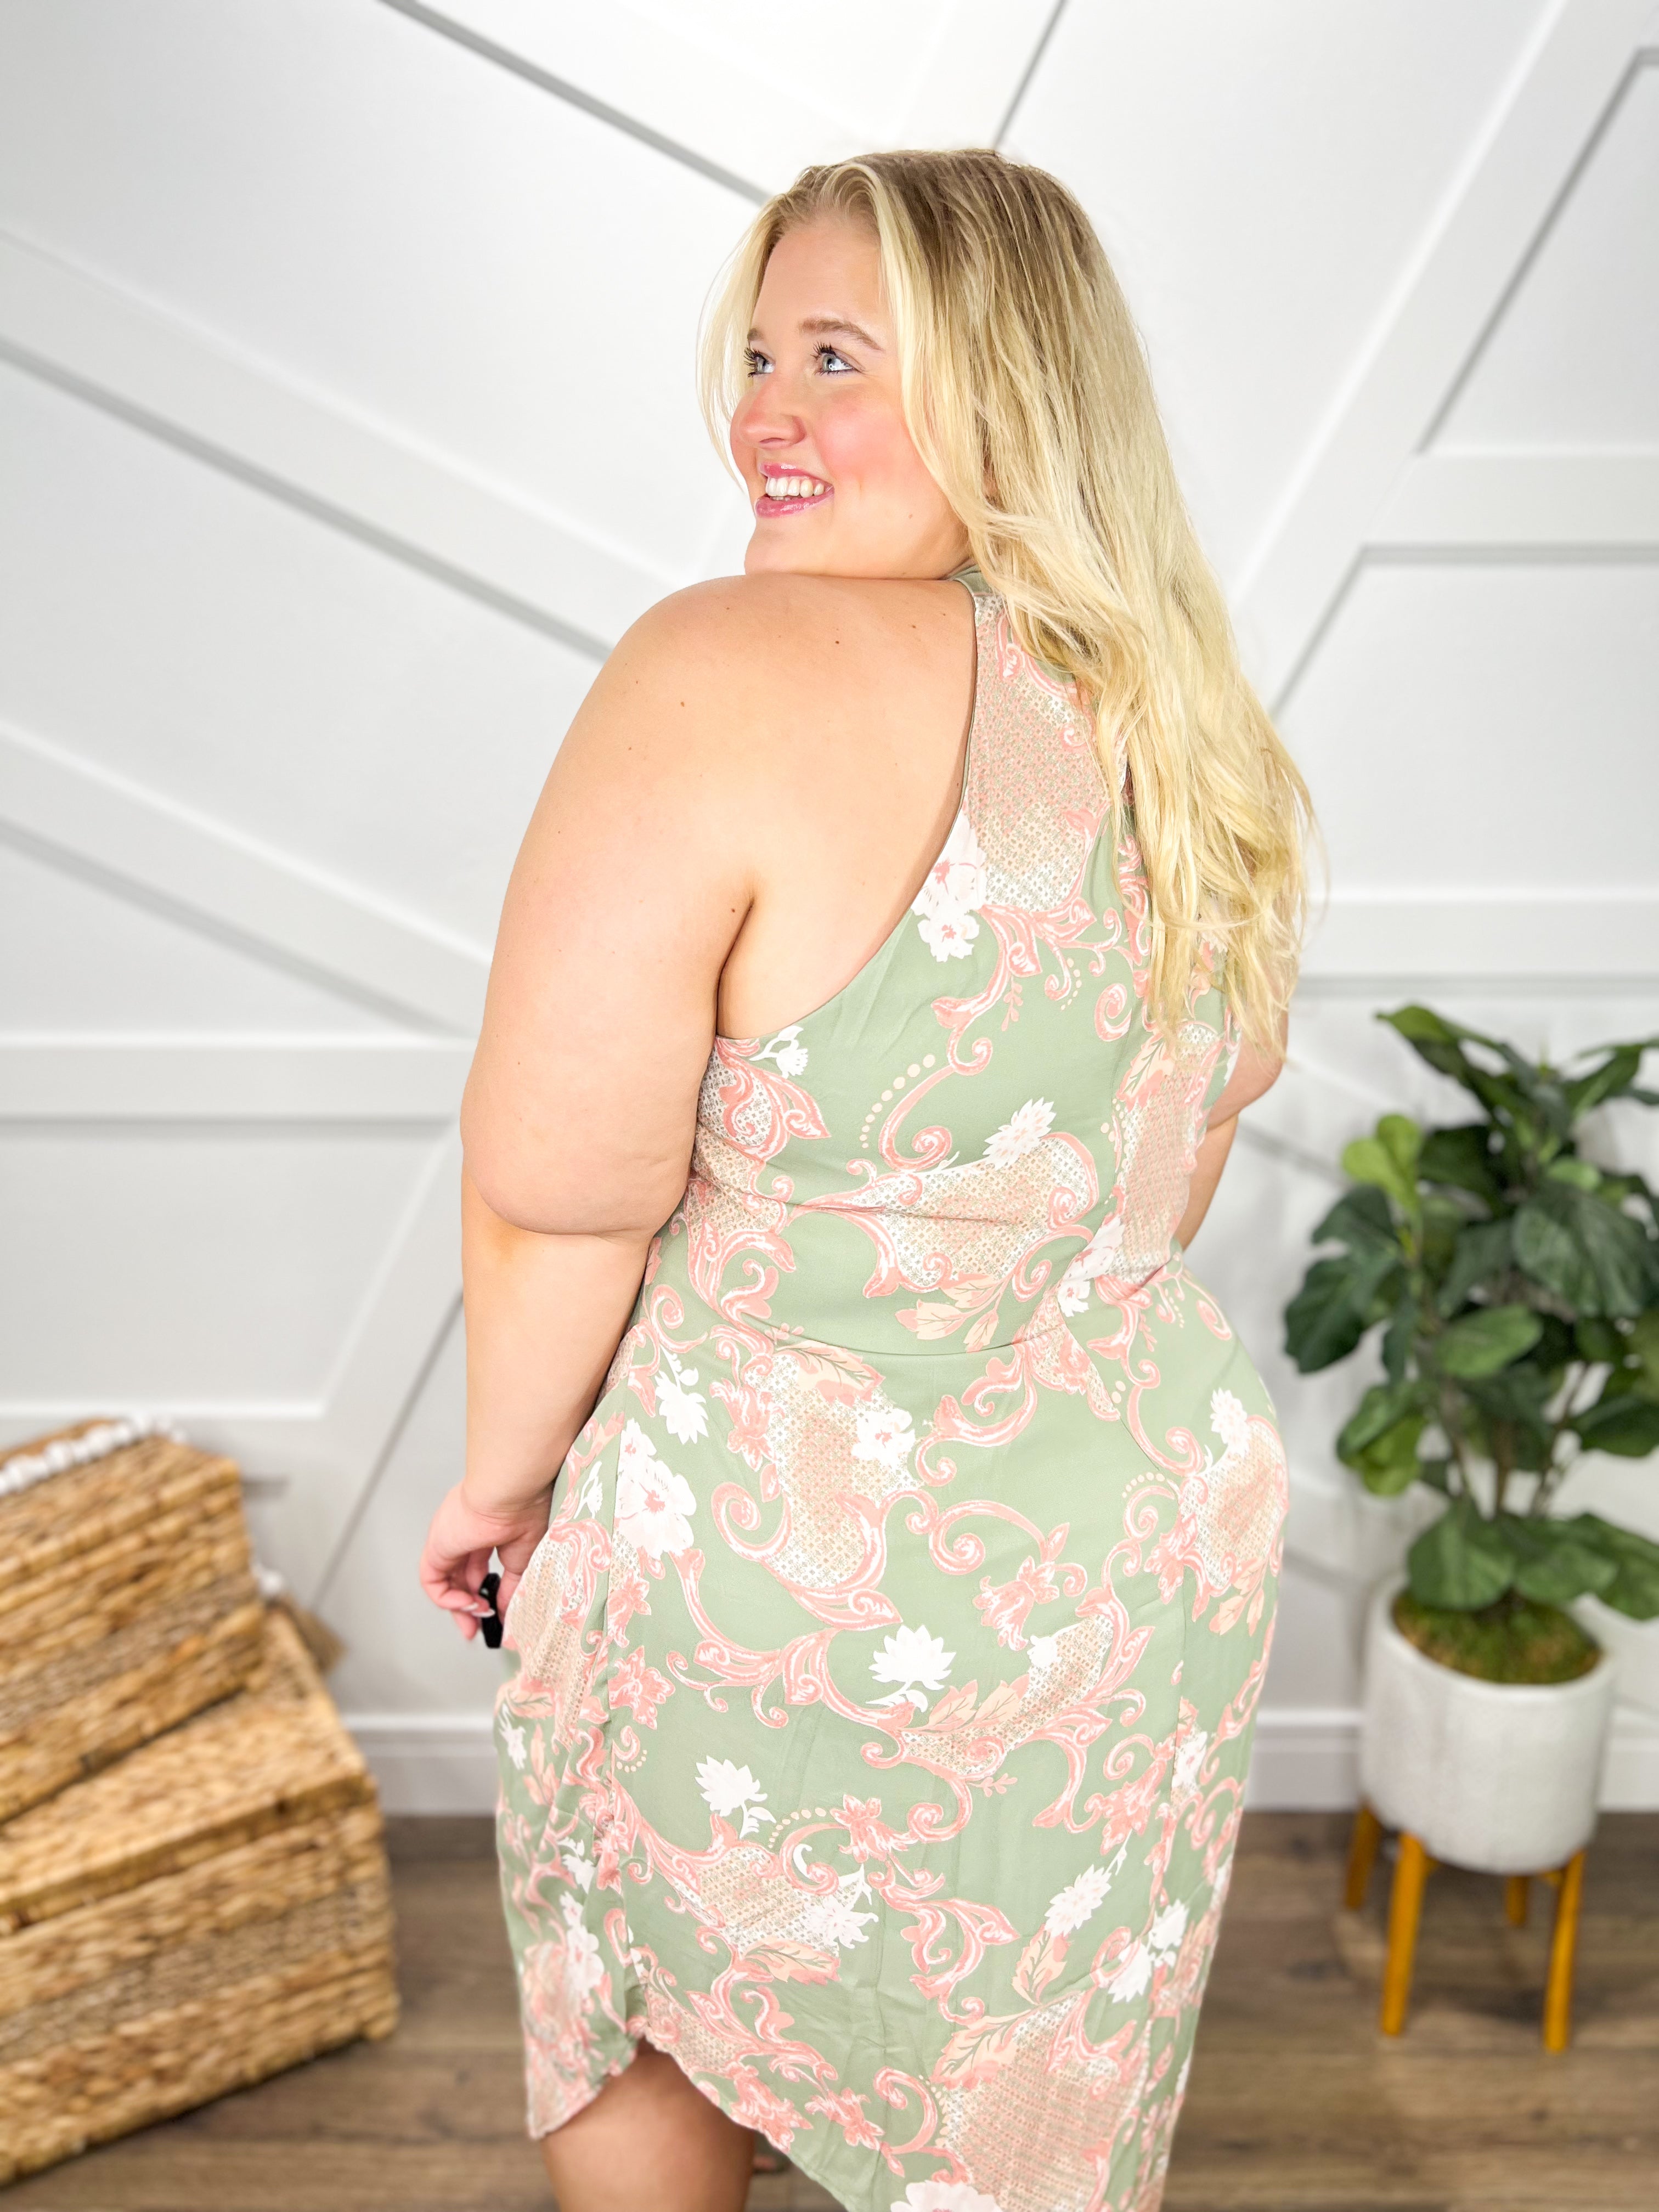 That Girl Dress-230 Dresses/Jumpsuits/Rompers-Emily Wonder-Heathered Boho Boutique, Women's Fashion and Accessories in Palmetto, FL